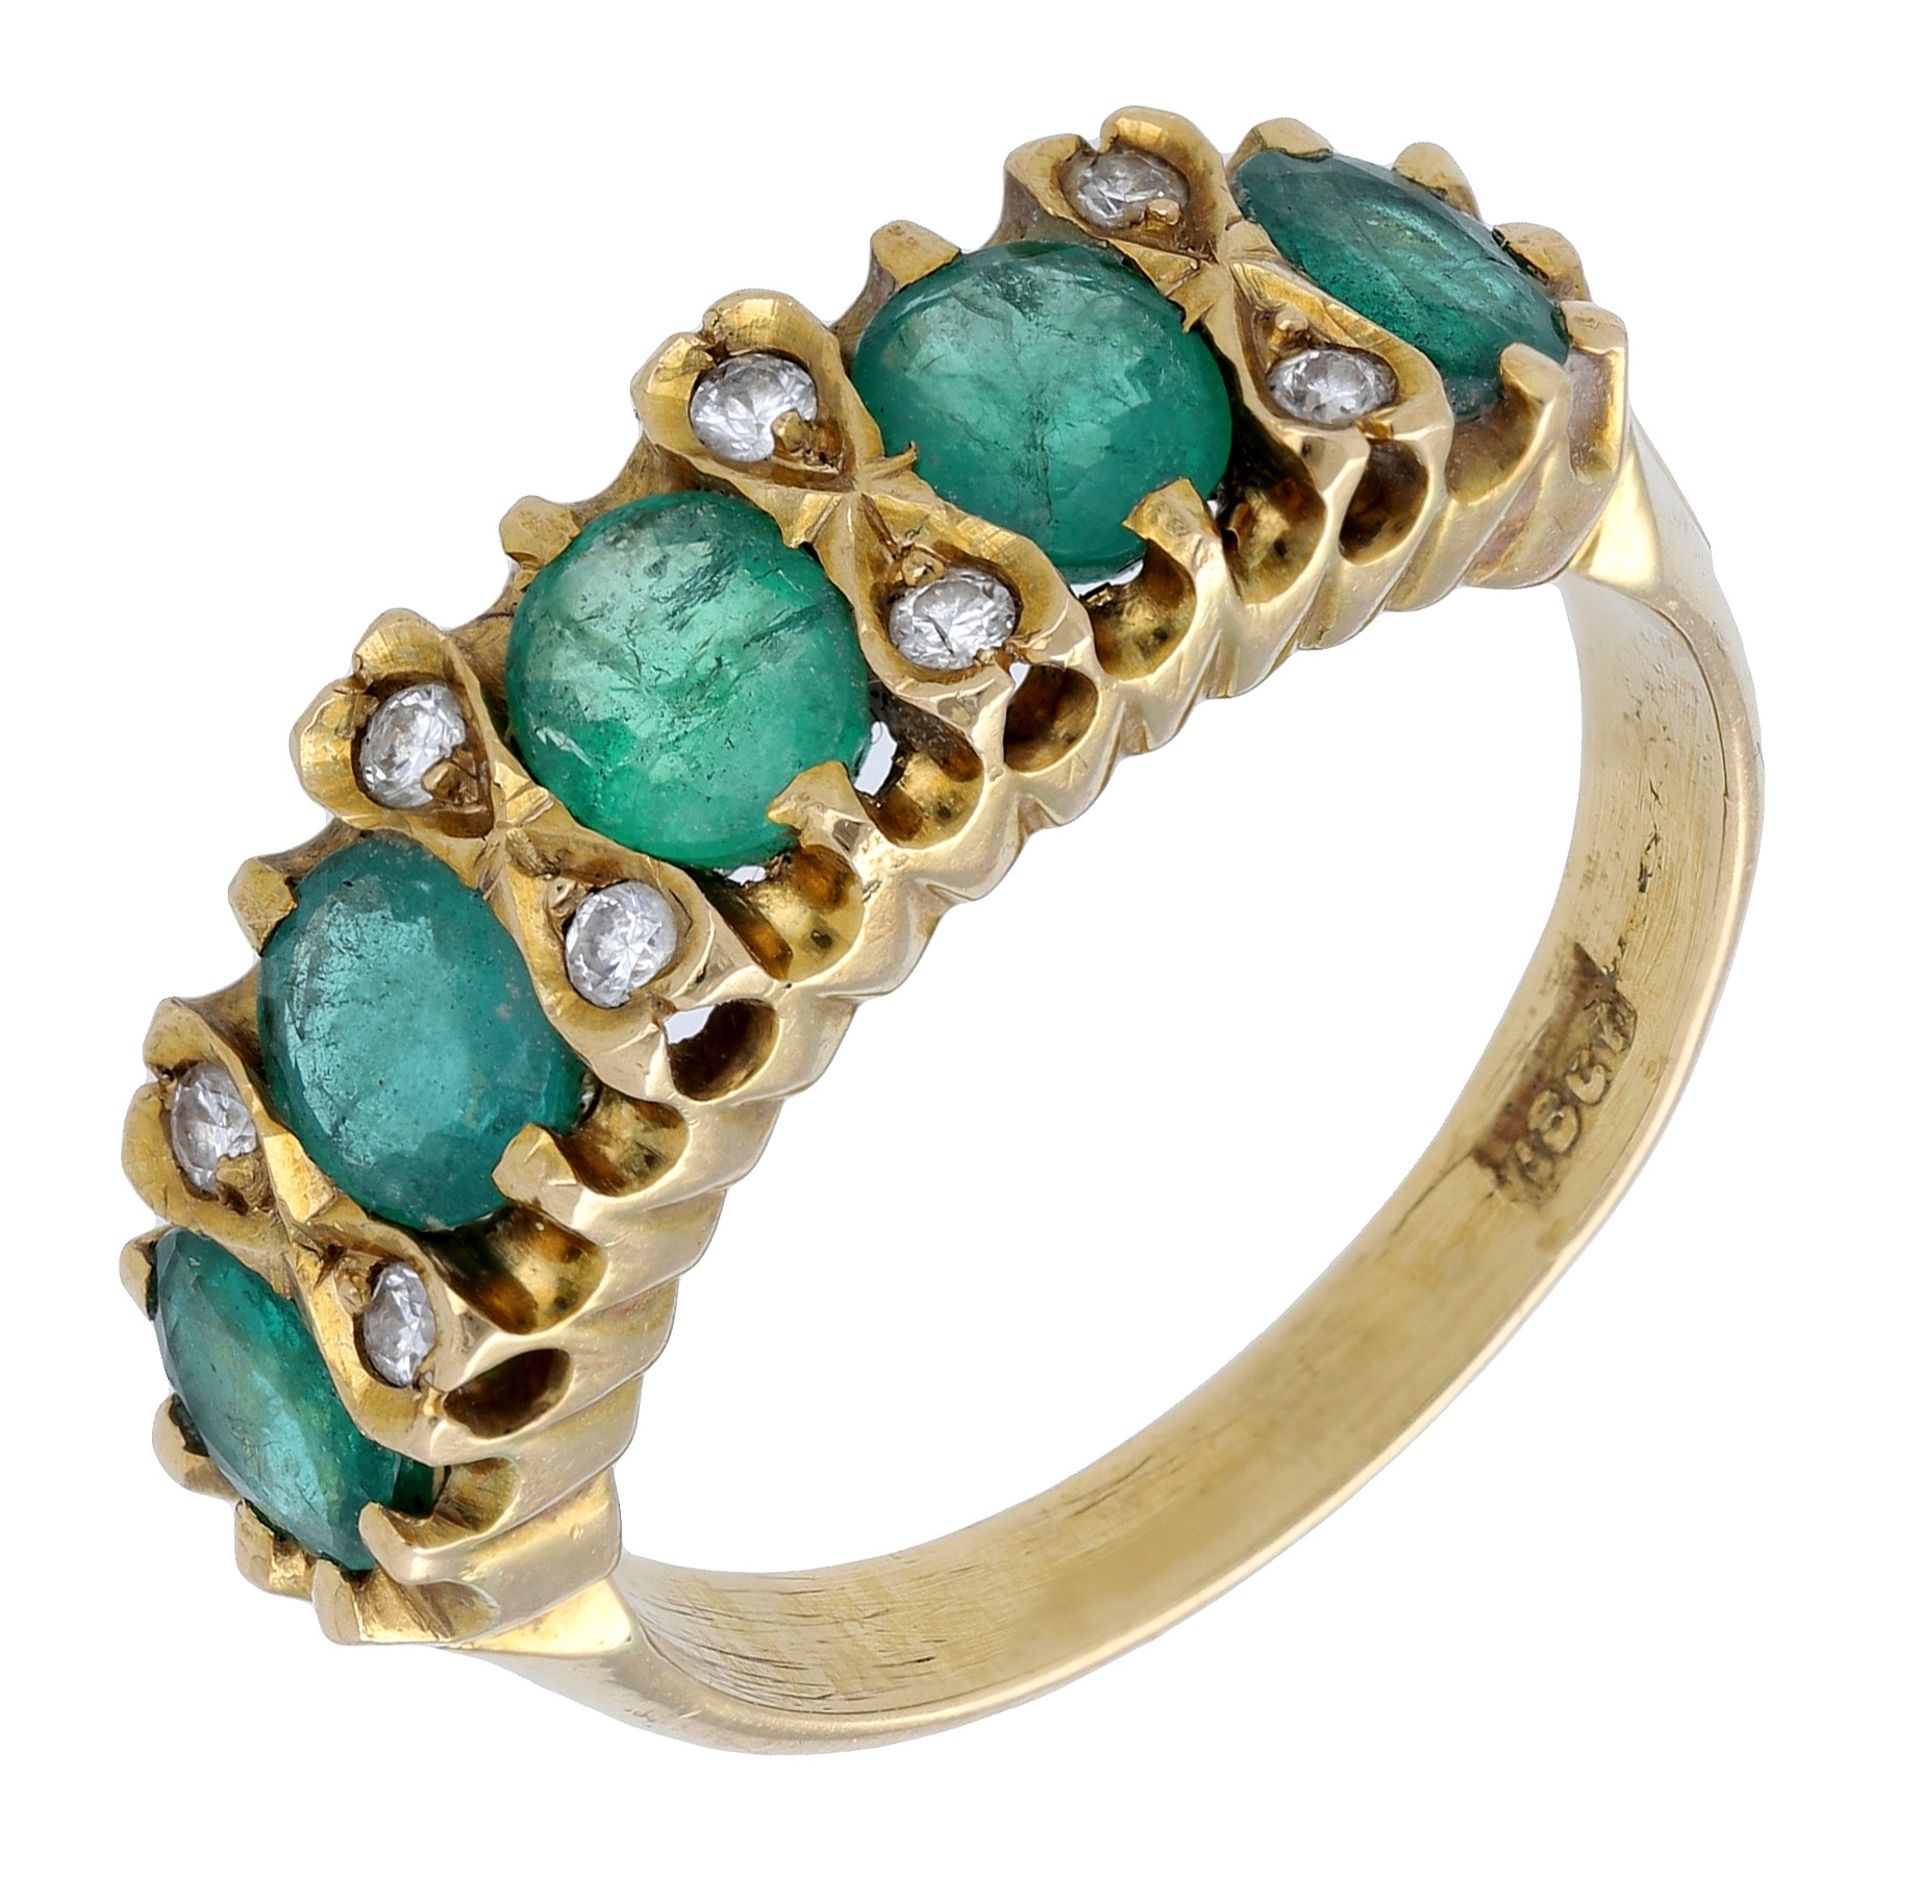 An emerald ring, set with five oval-cut emeralds, with brilliant-cut diamond highlights betw...